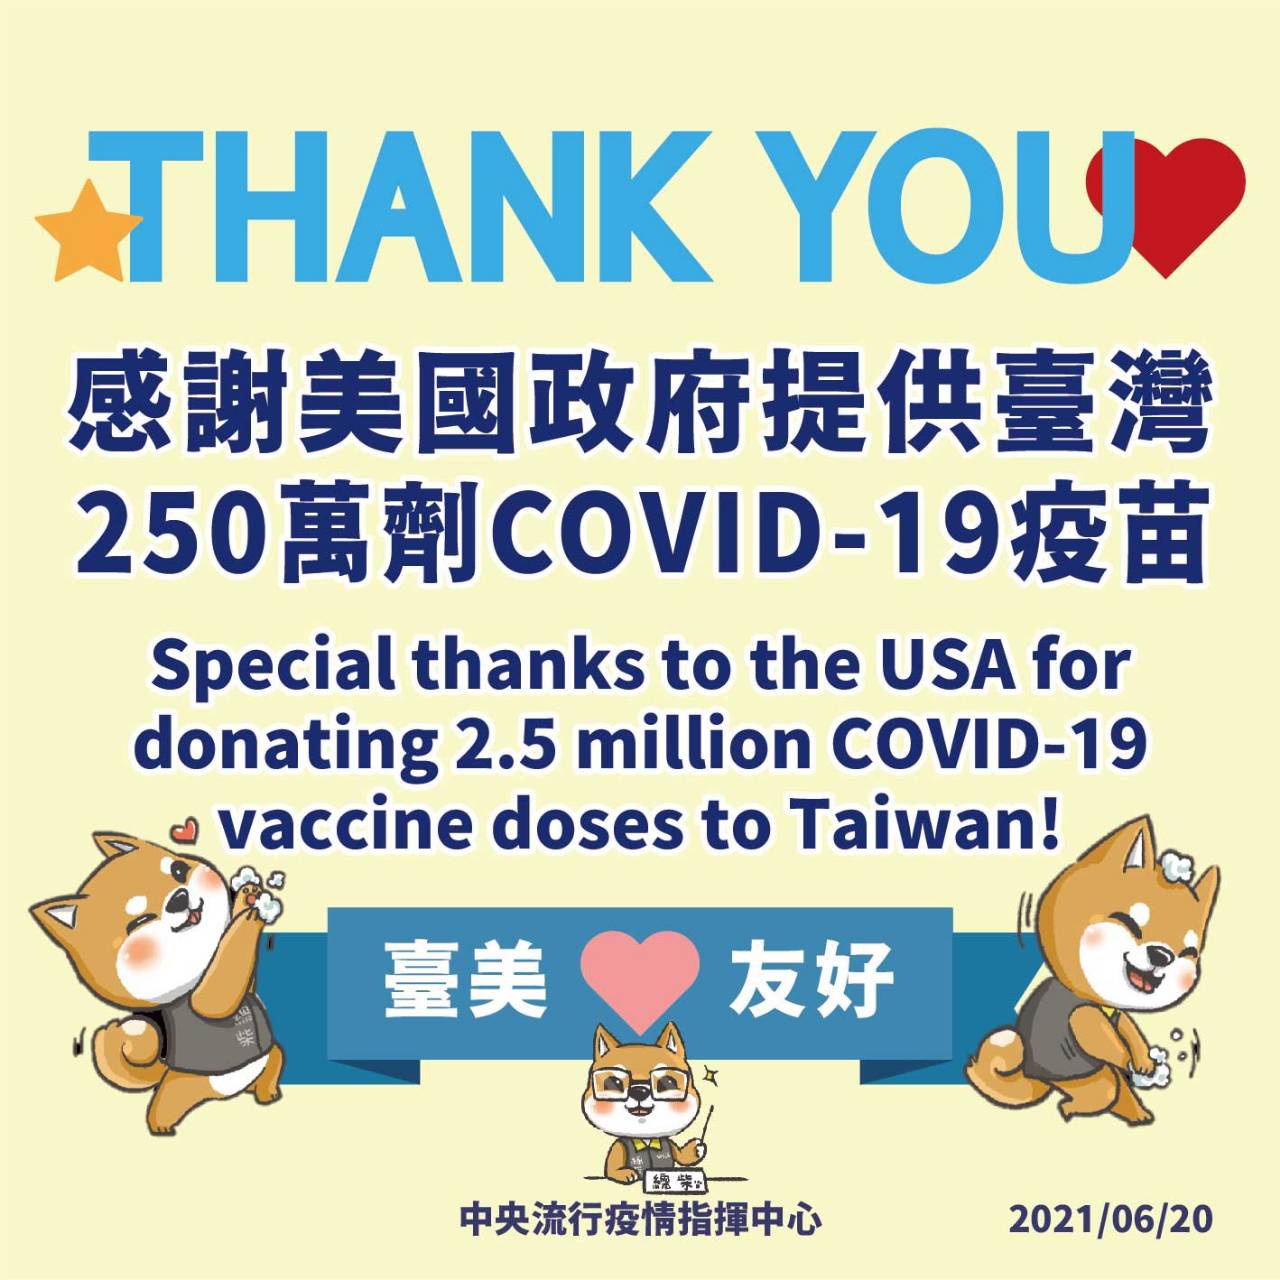 President Tsai Ing-Wen is grateful to all countries who extended help to Taiwan and she will continue to get more vaccines. Photo/Provided by the Presidential Palace